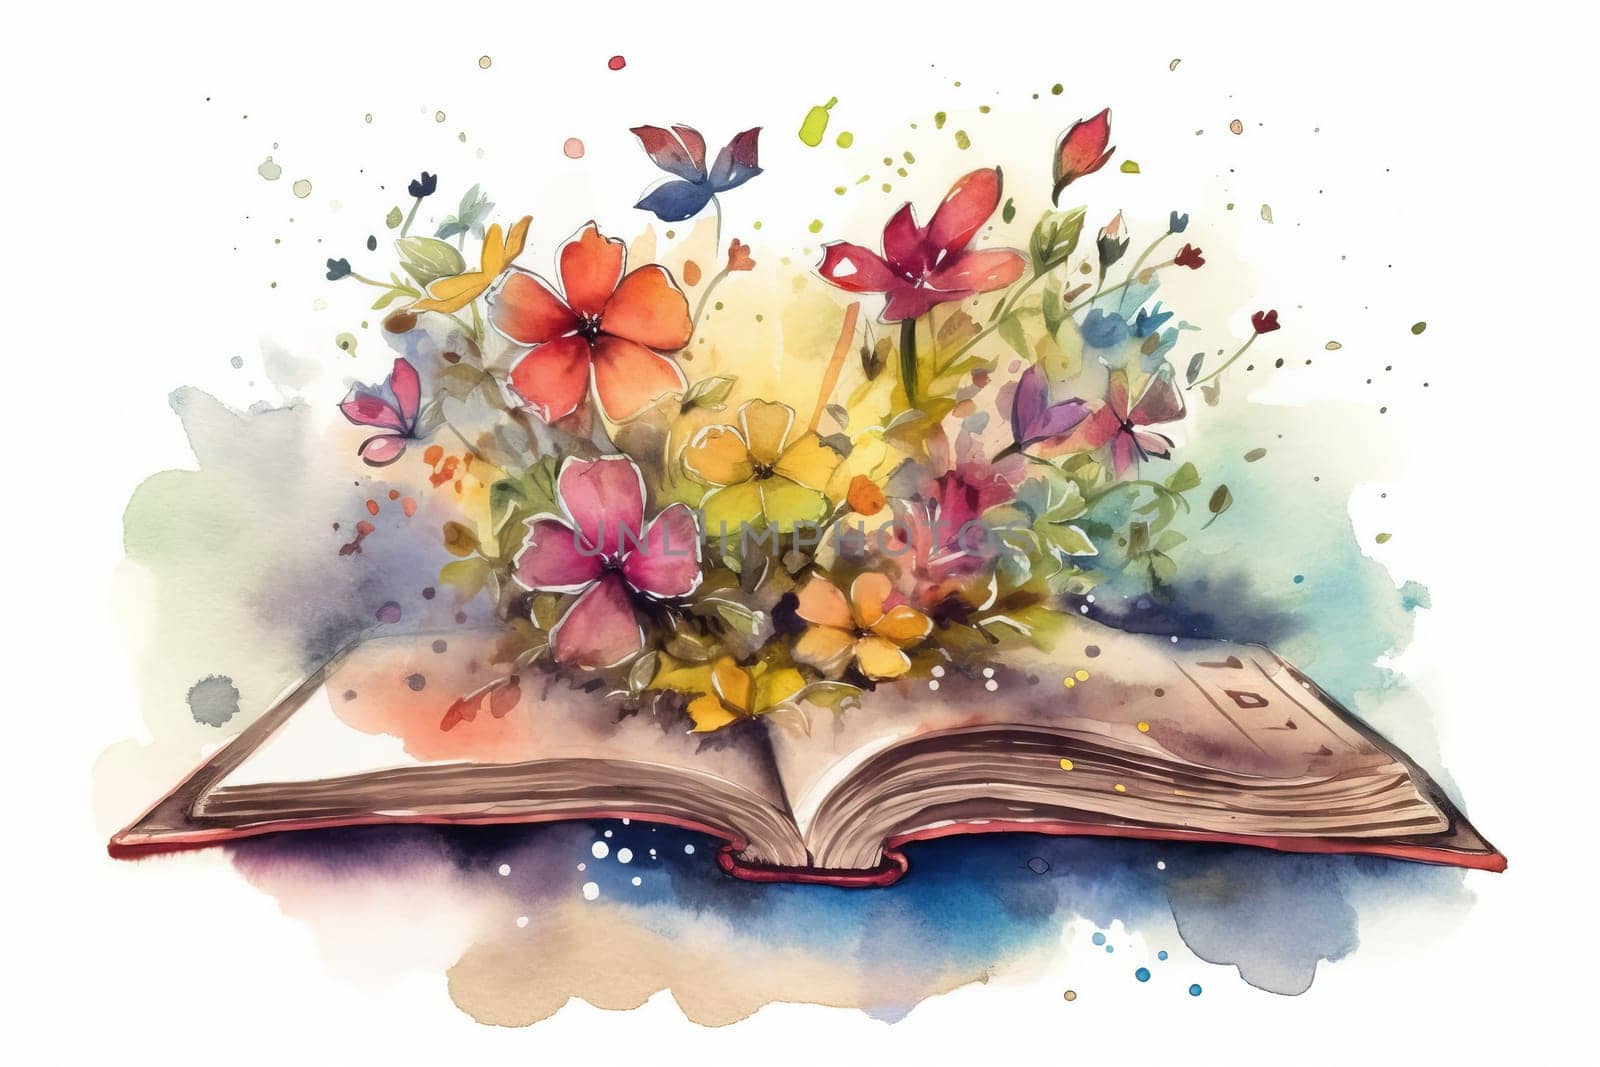 Watercolor Illustration Of Open Magic Book With Colorful Flowers by GekaSkr